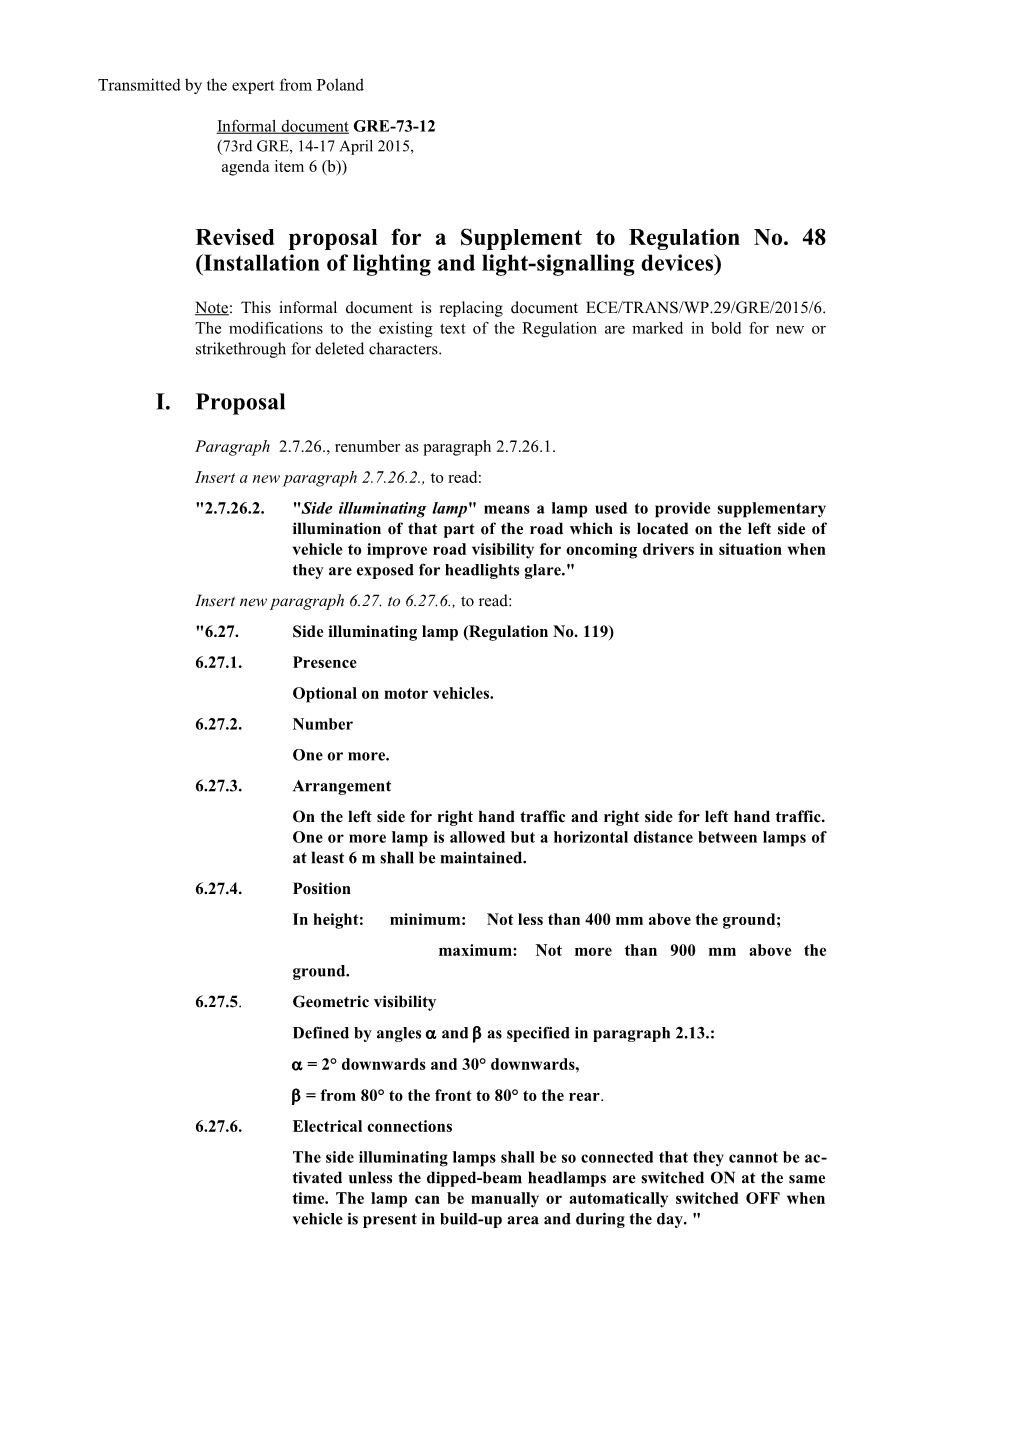 Revised Proposal for a Supplement to Regulation No. 48 (Installation of Lighting And